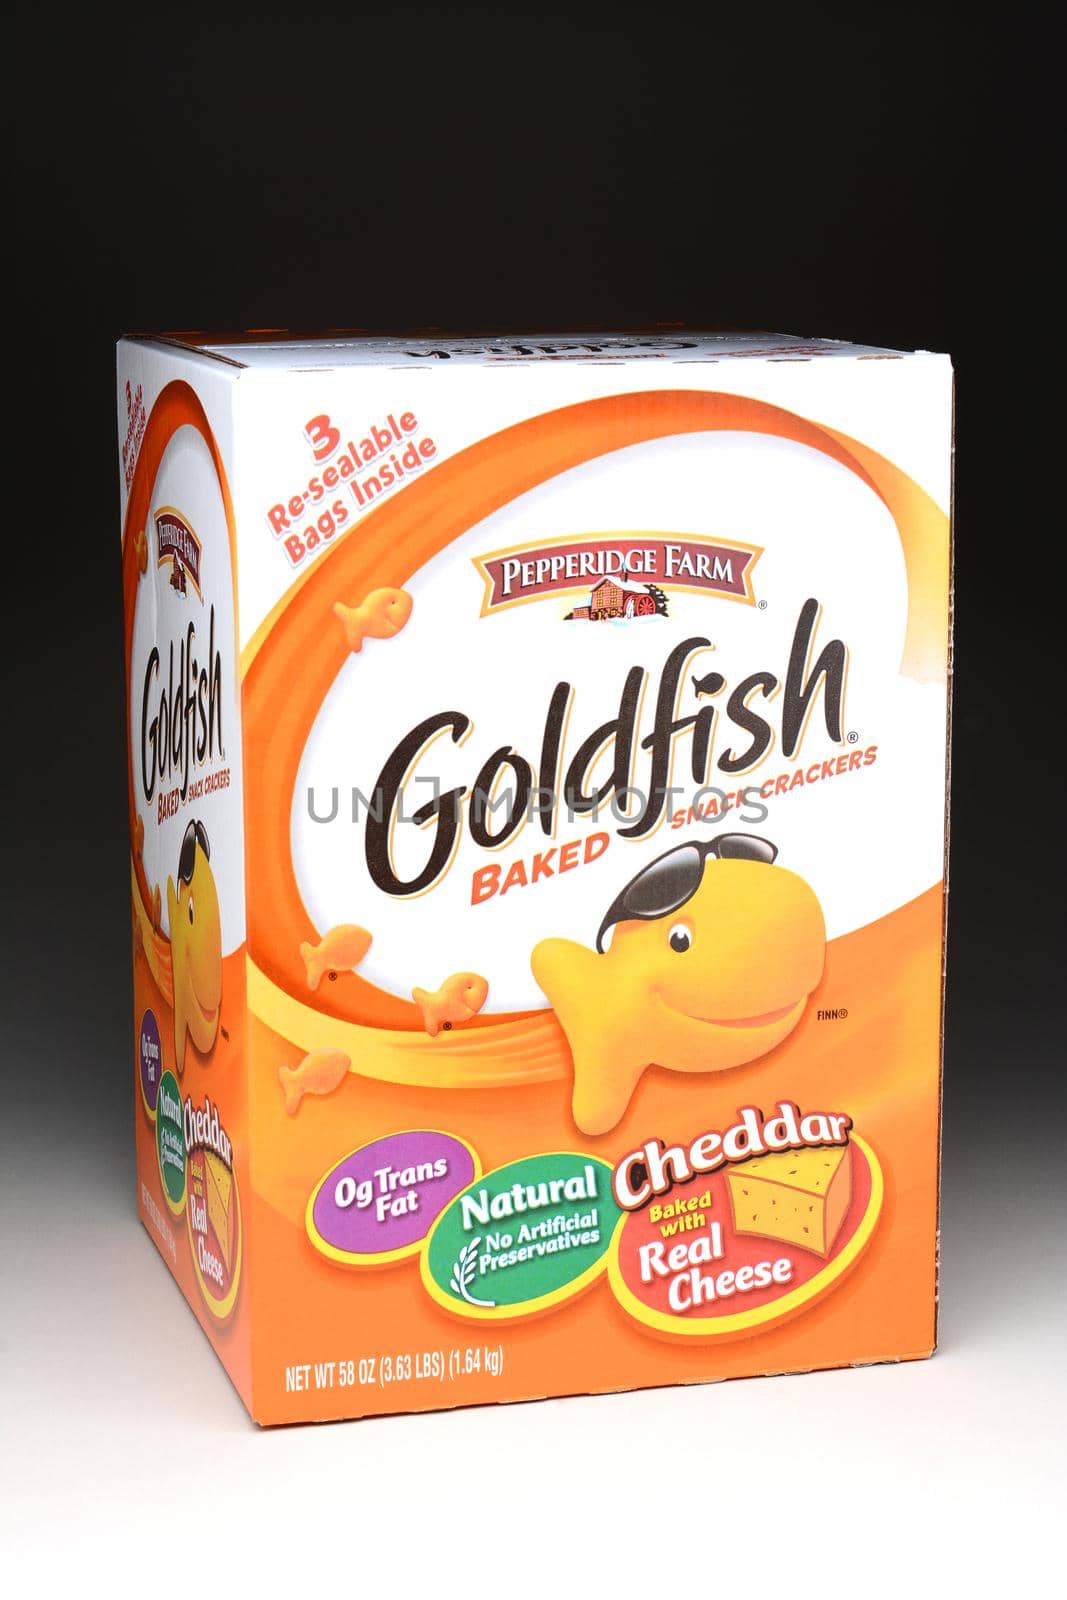 IRVINE, CA - January 21, 2013: 58 ounce box of Pepperidge Farm Goldfish snack crackers. Originally from Switzerland, Goldfish Crackers were introduced to the US in 1962.